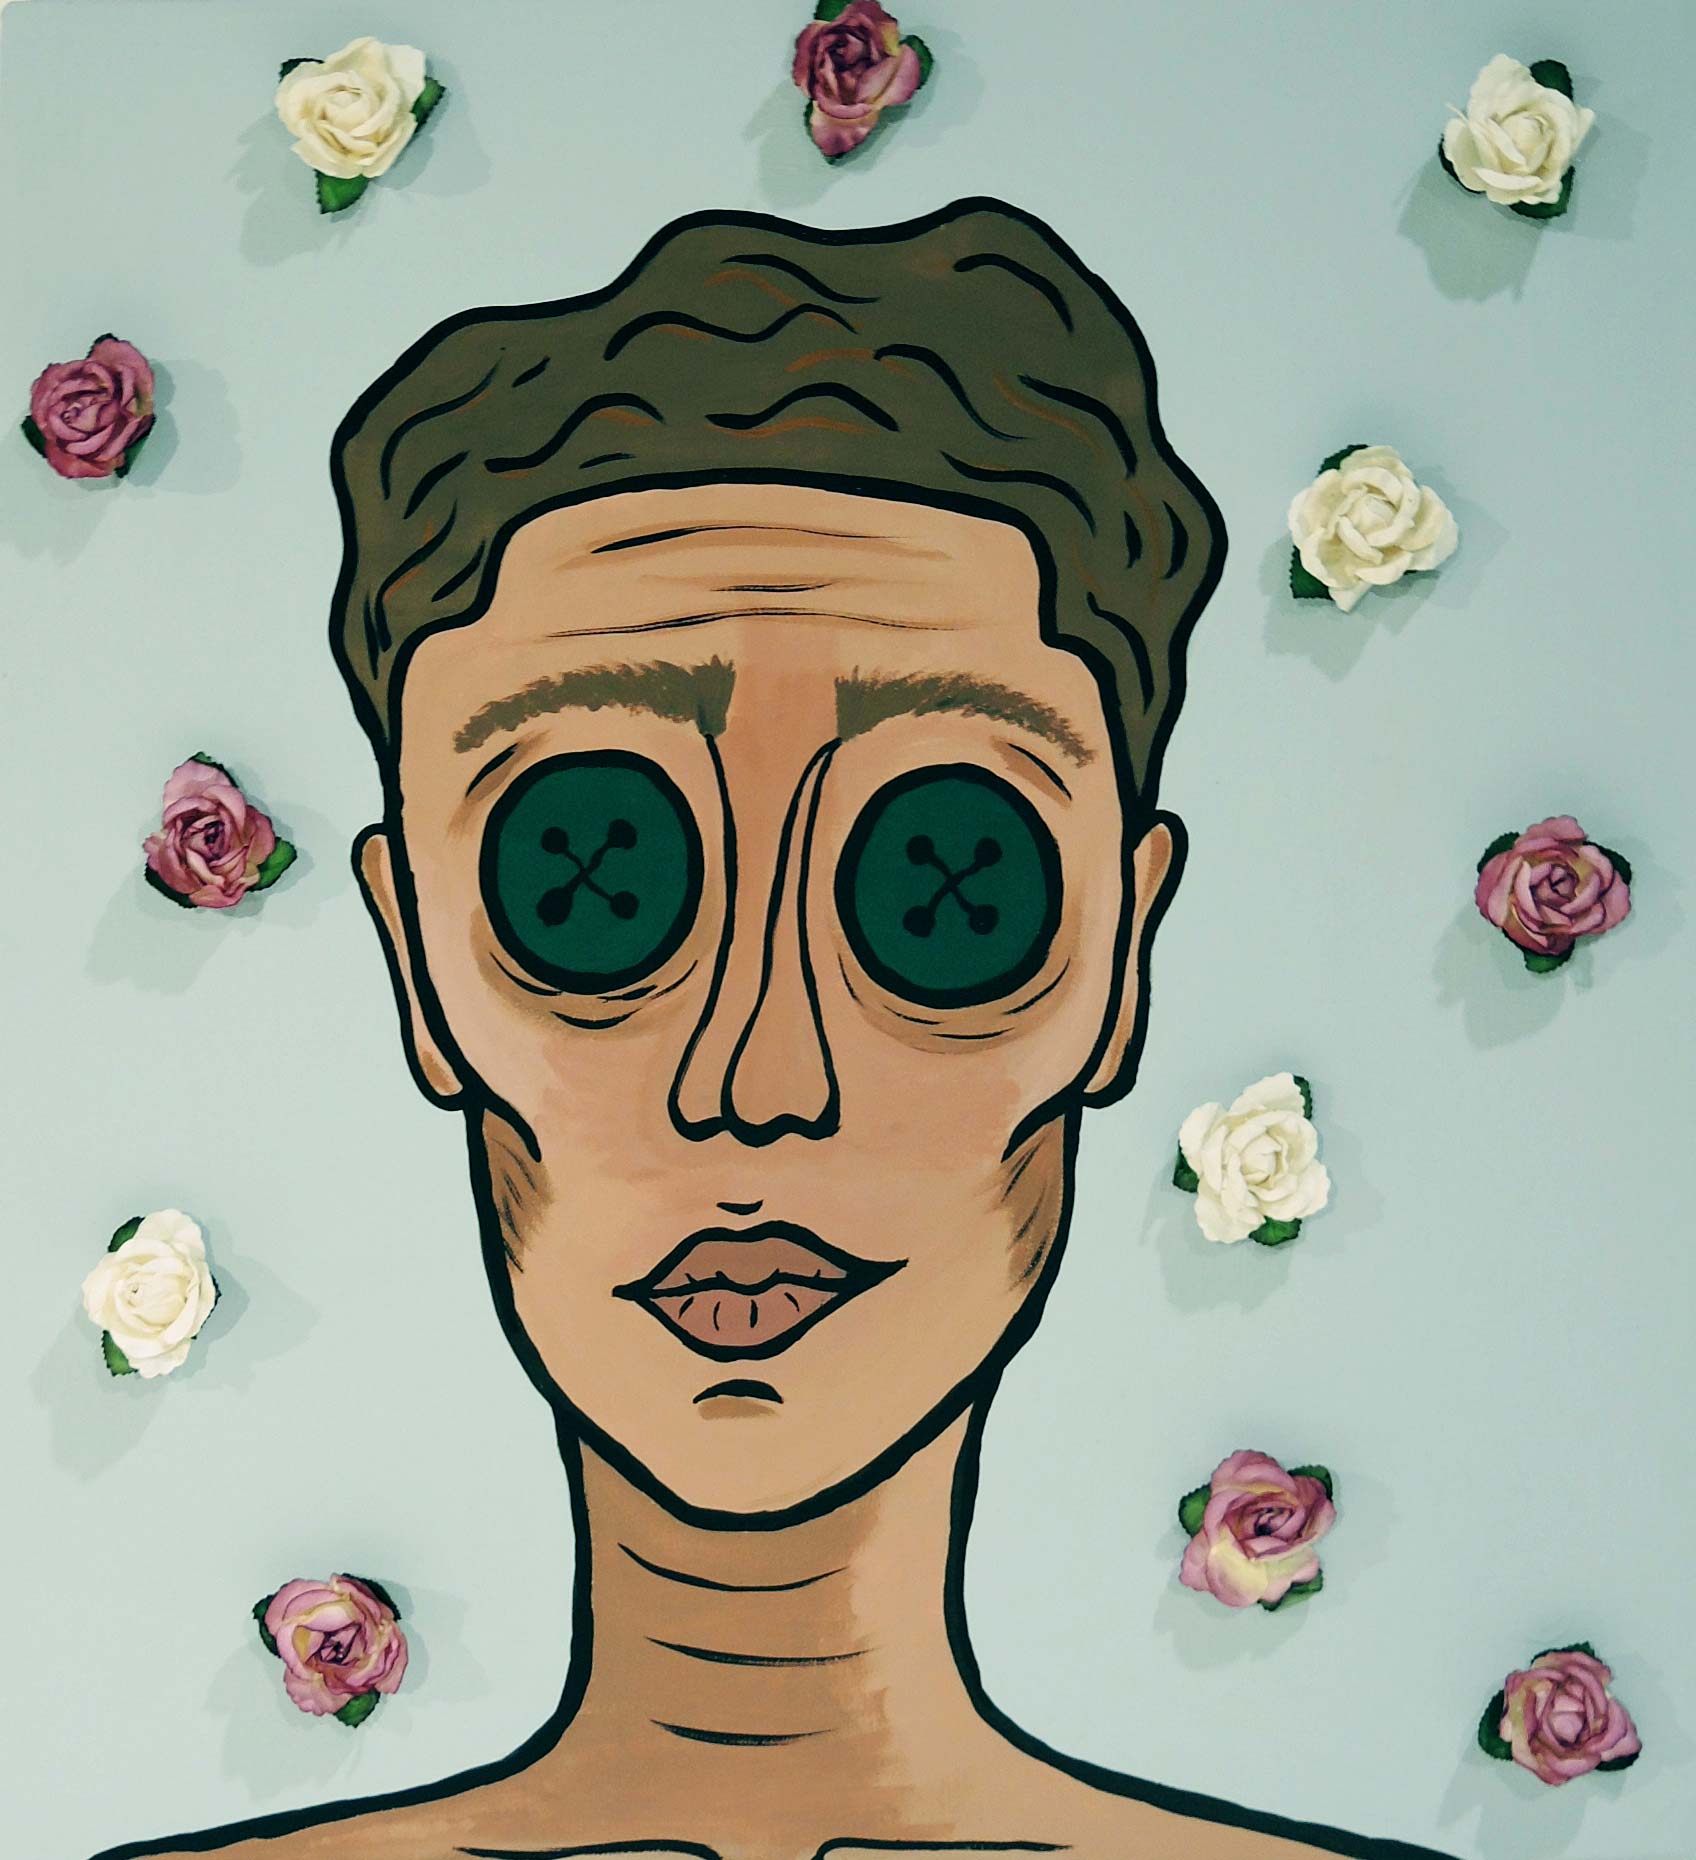 An illustration by Tahiri Guevara of a person with green circles over their eyes and flowers in the background